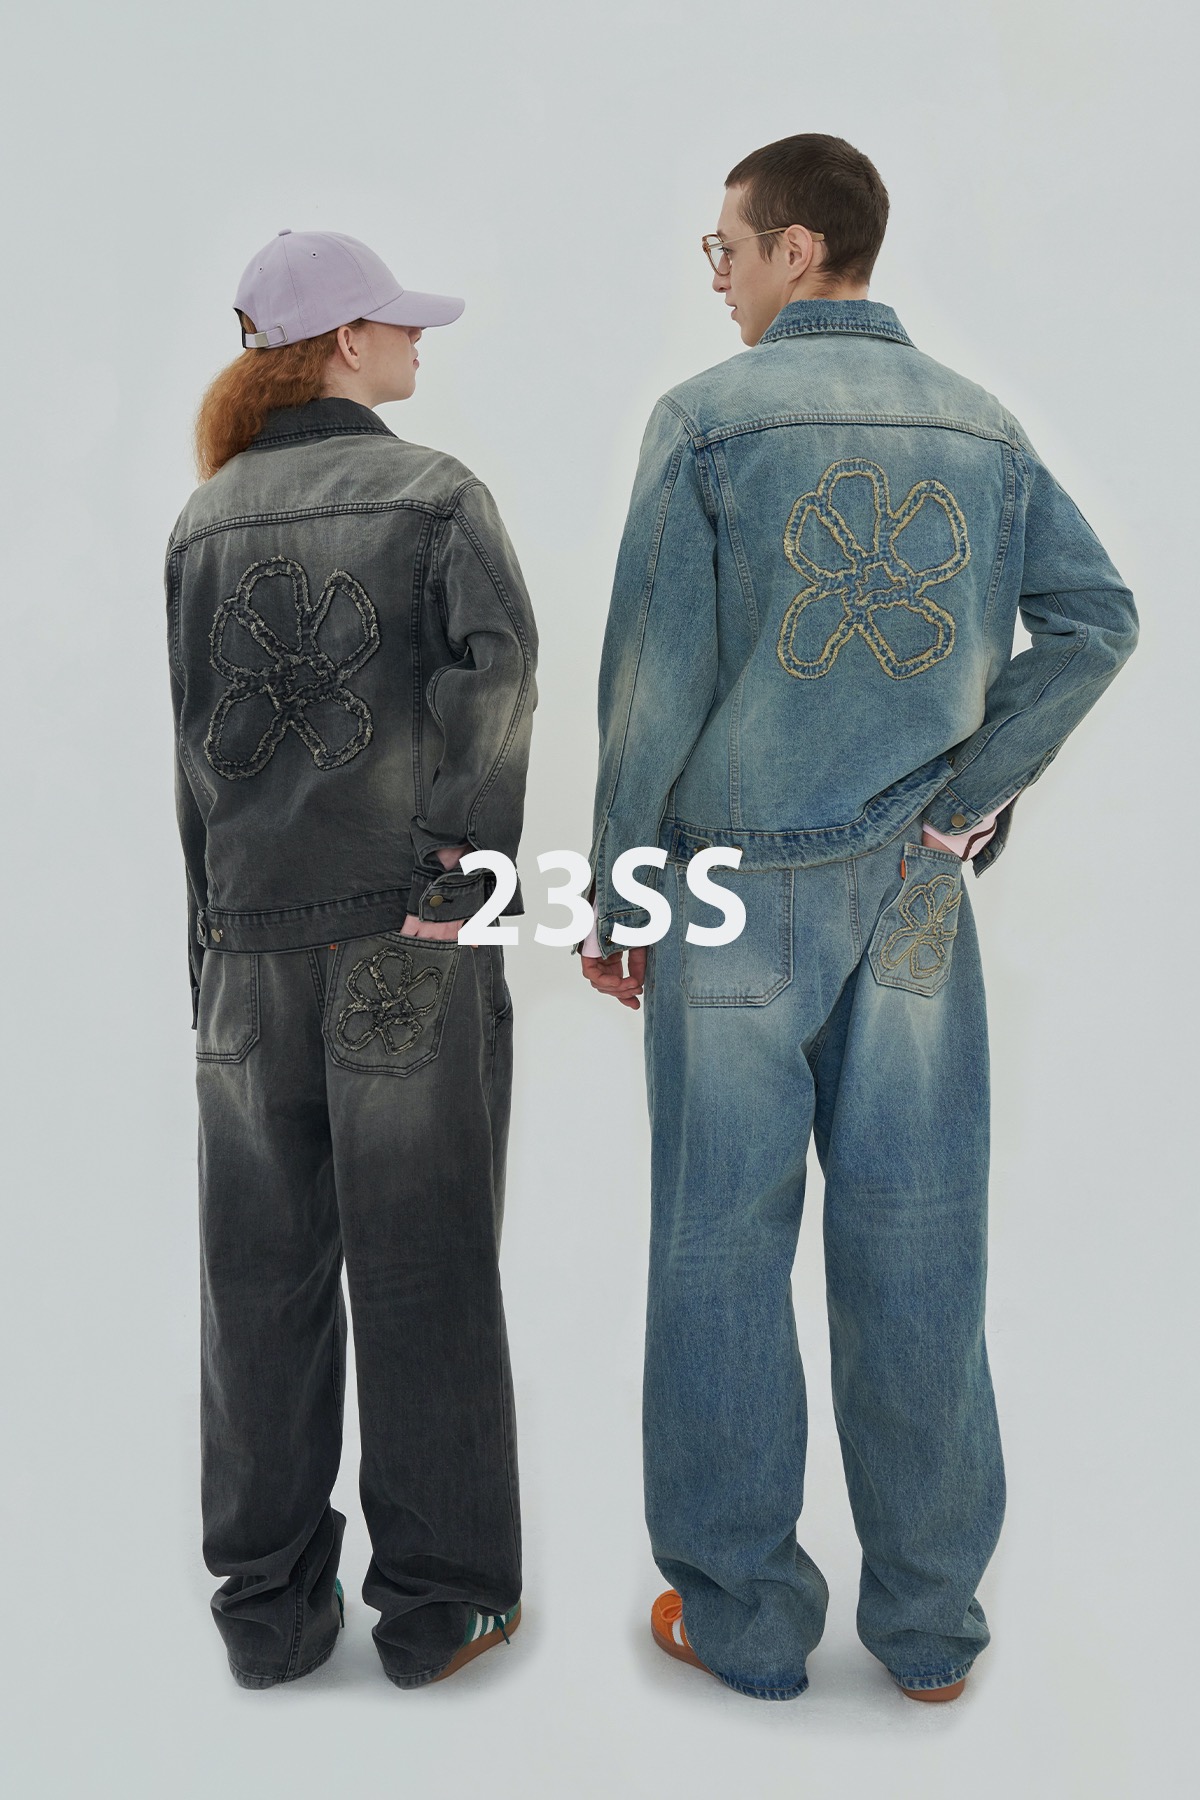 UNALLOYED 23SS COLLECTION